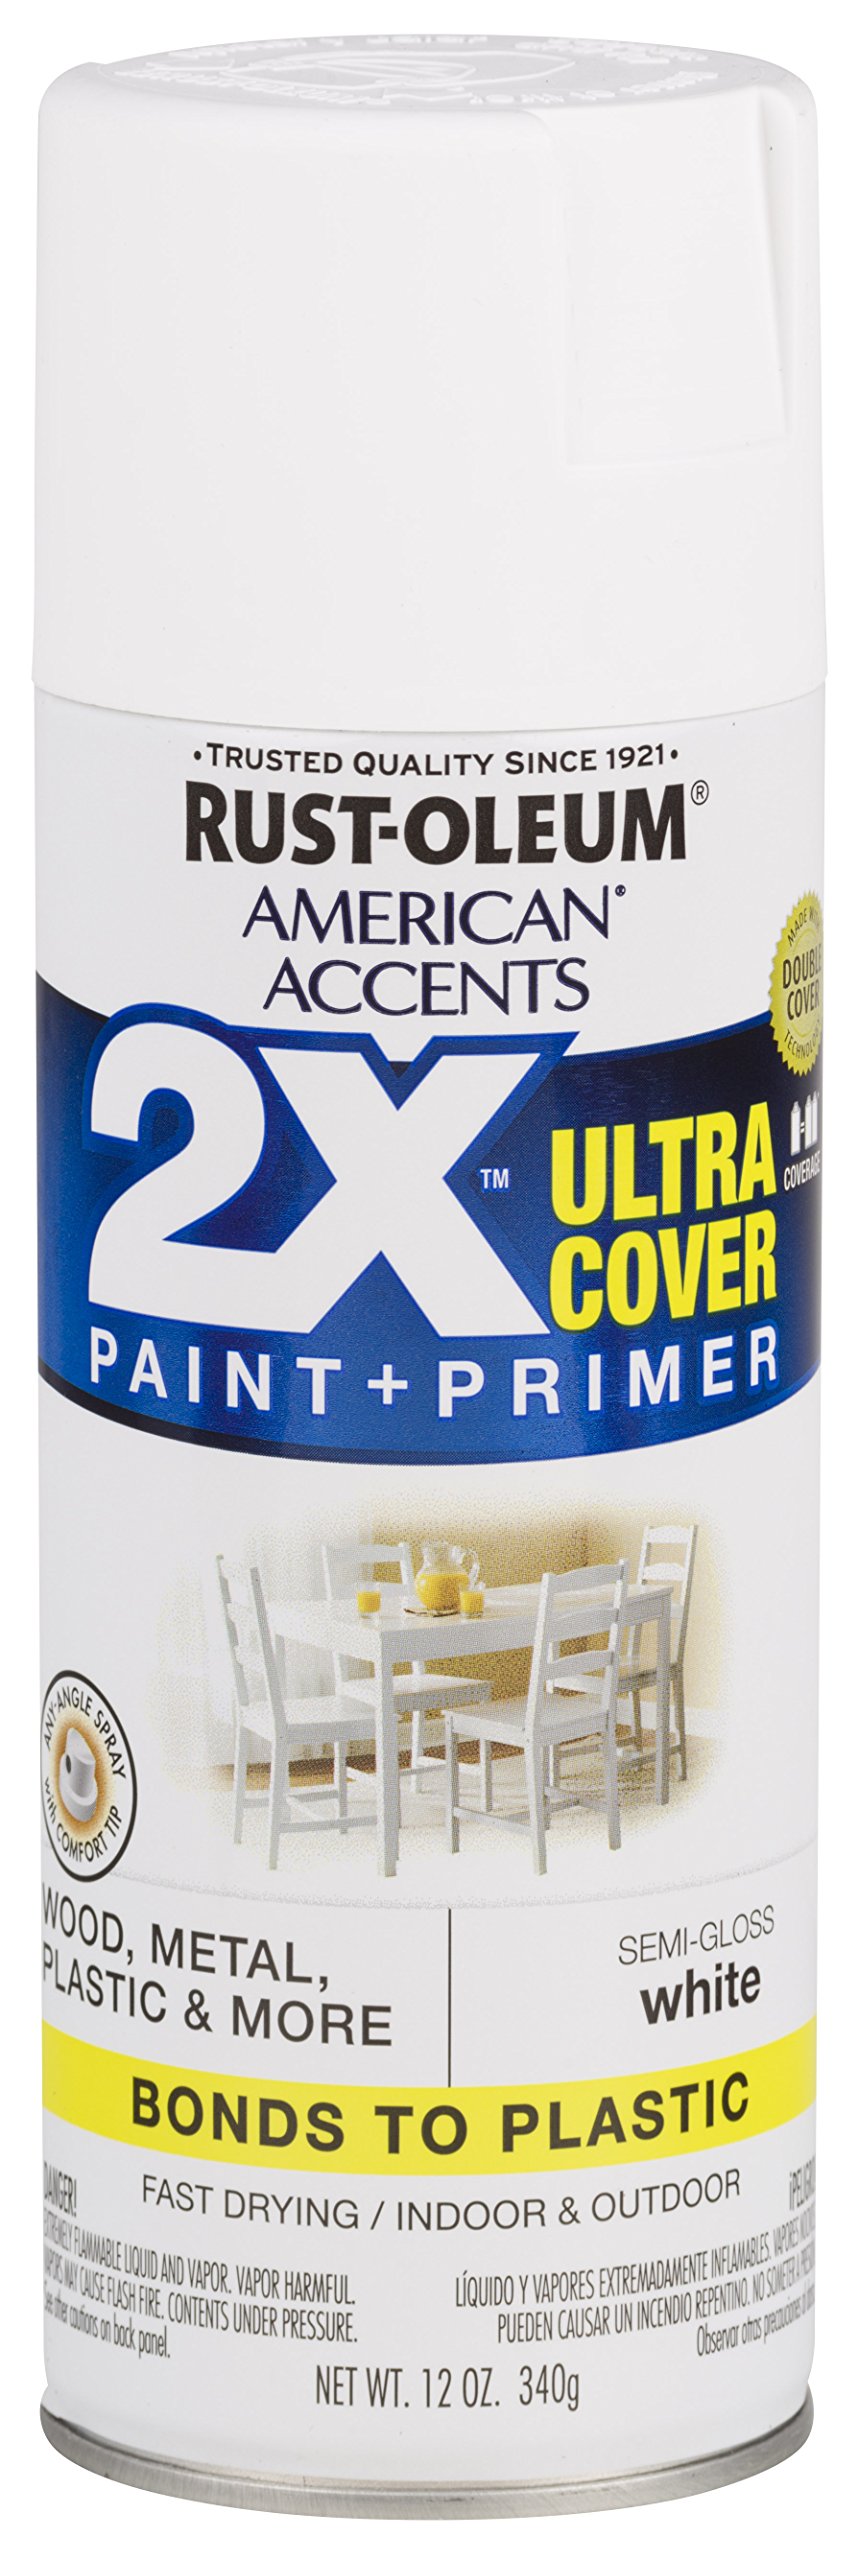 Rust-Oleum 327951-6 PK American Accents Spray Paint, 12 Ounce (Pack of 6), Semi-Gloss White, 72 Ounce